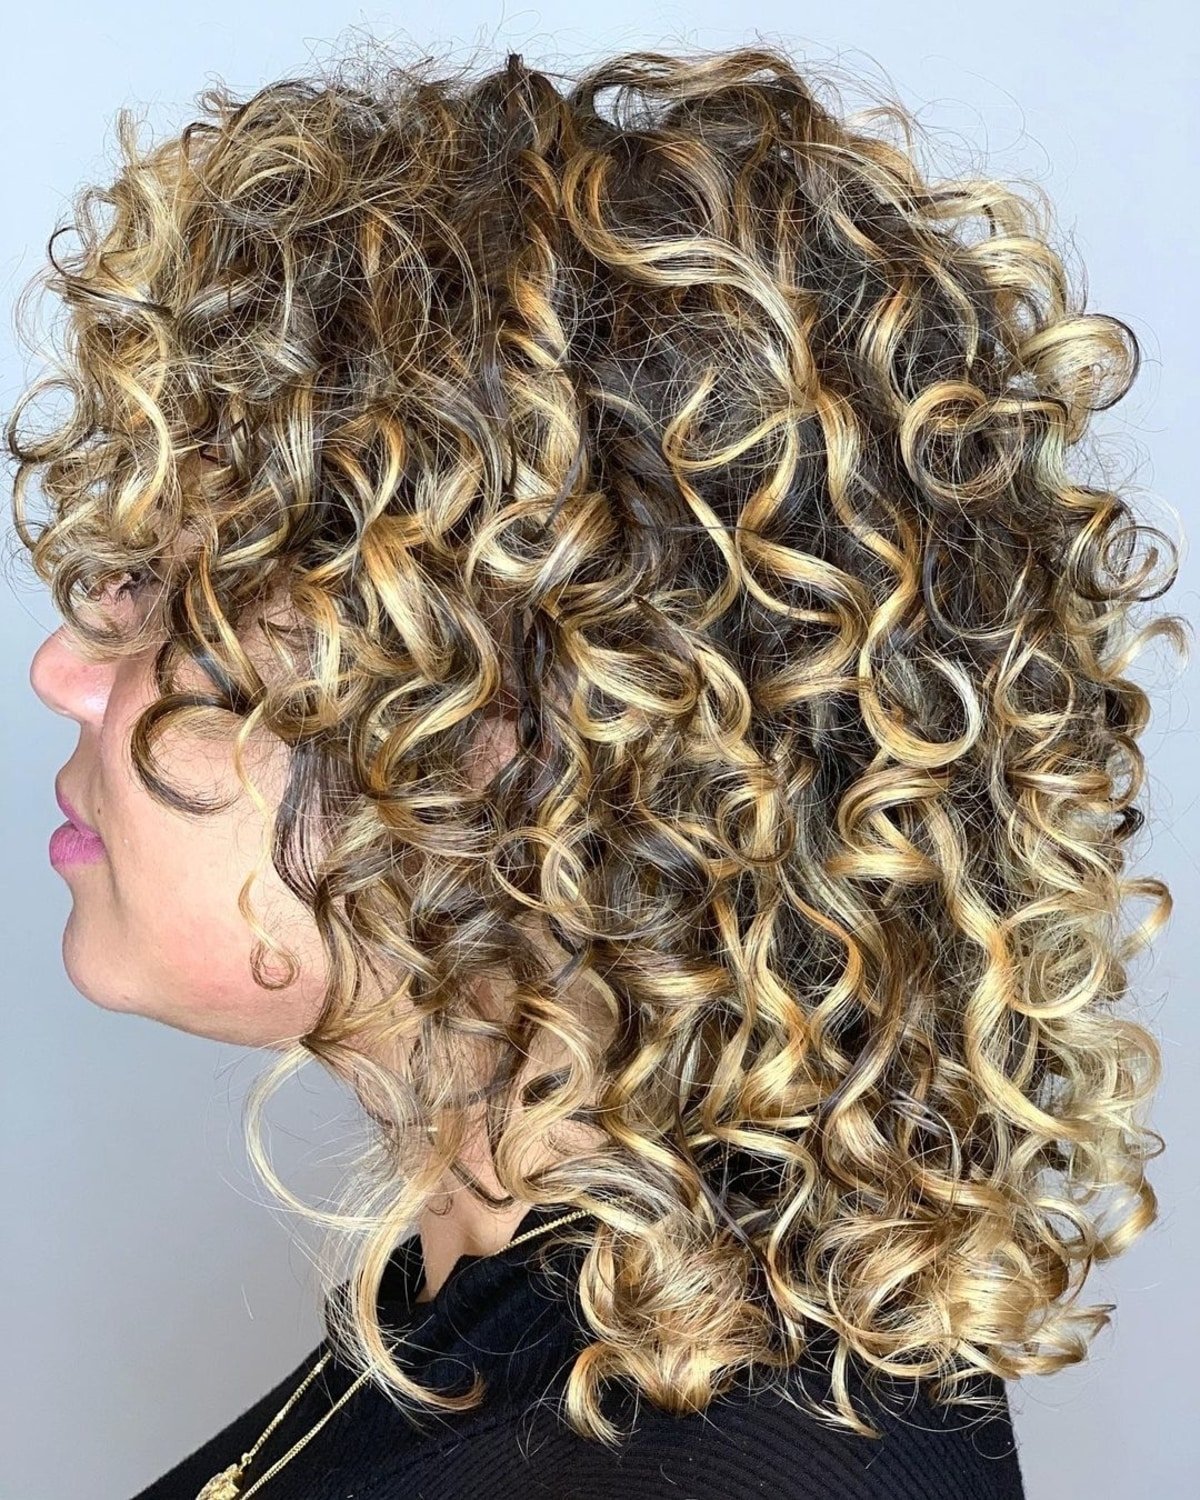 Curly medium brown hair with bright blonde highlights